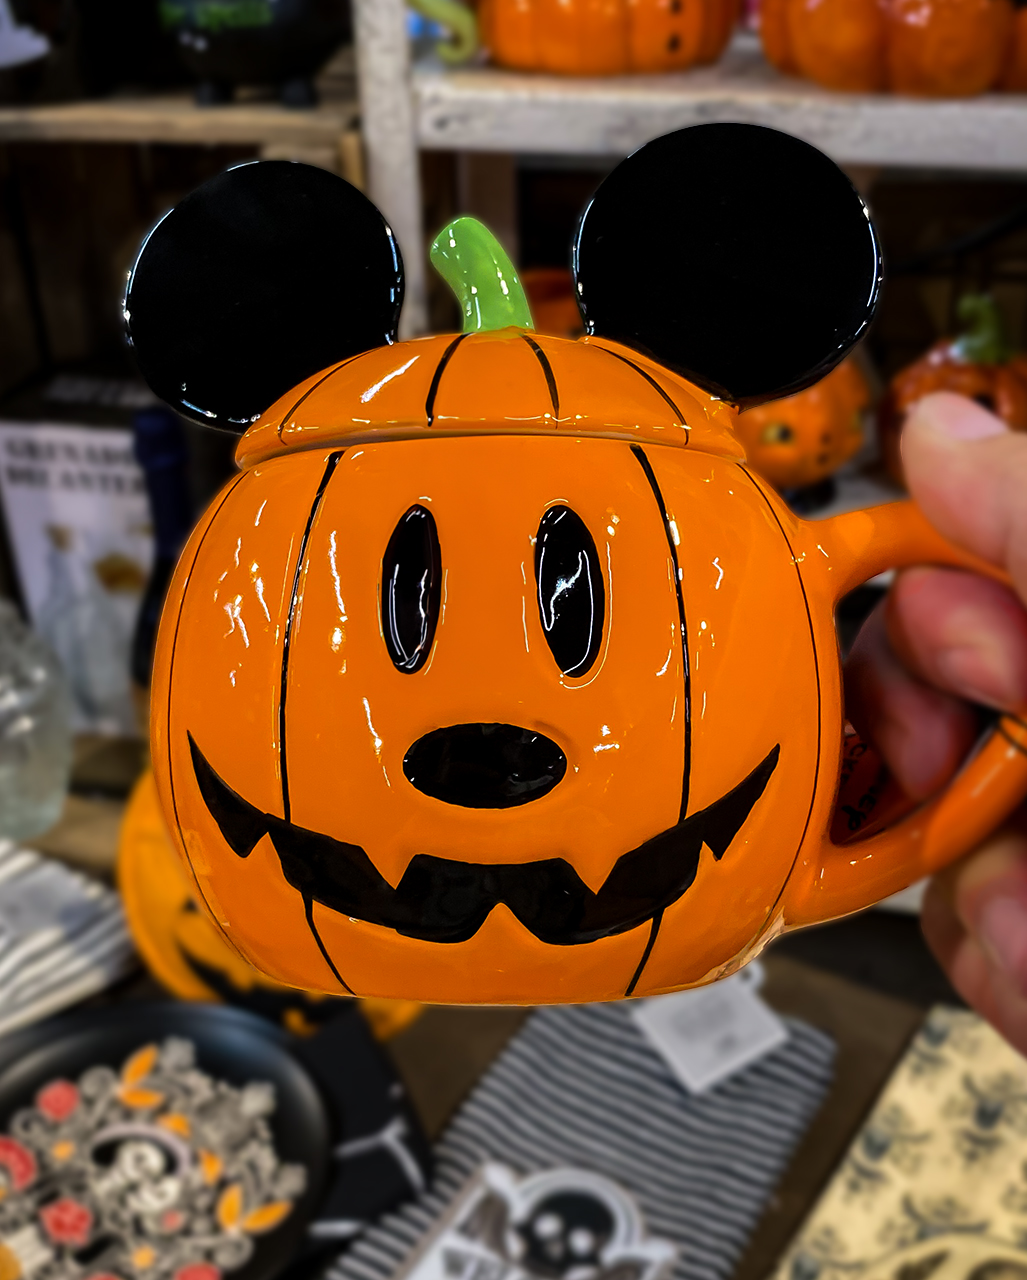 https://inst-2.cdn.shockers.de/hs_cdn/out/pictures/master/product/2/disney-mickey-mouse-kuerbis-tasse-disney-mickey-mouse-halloween-mug-halloween-geschirr-55326-02.jpg